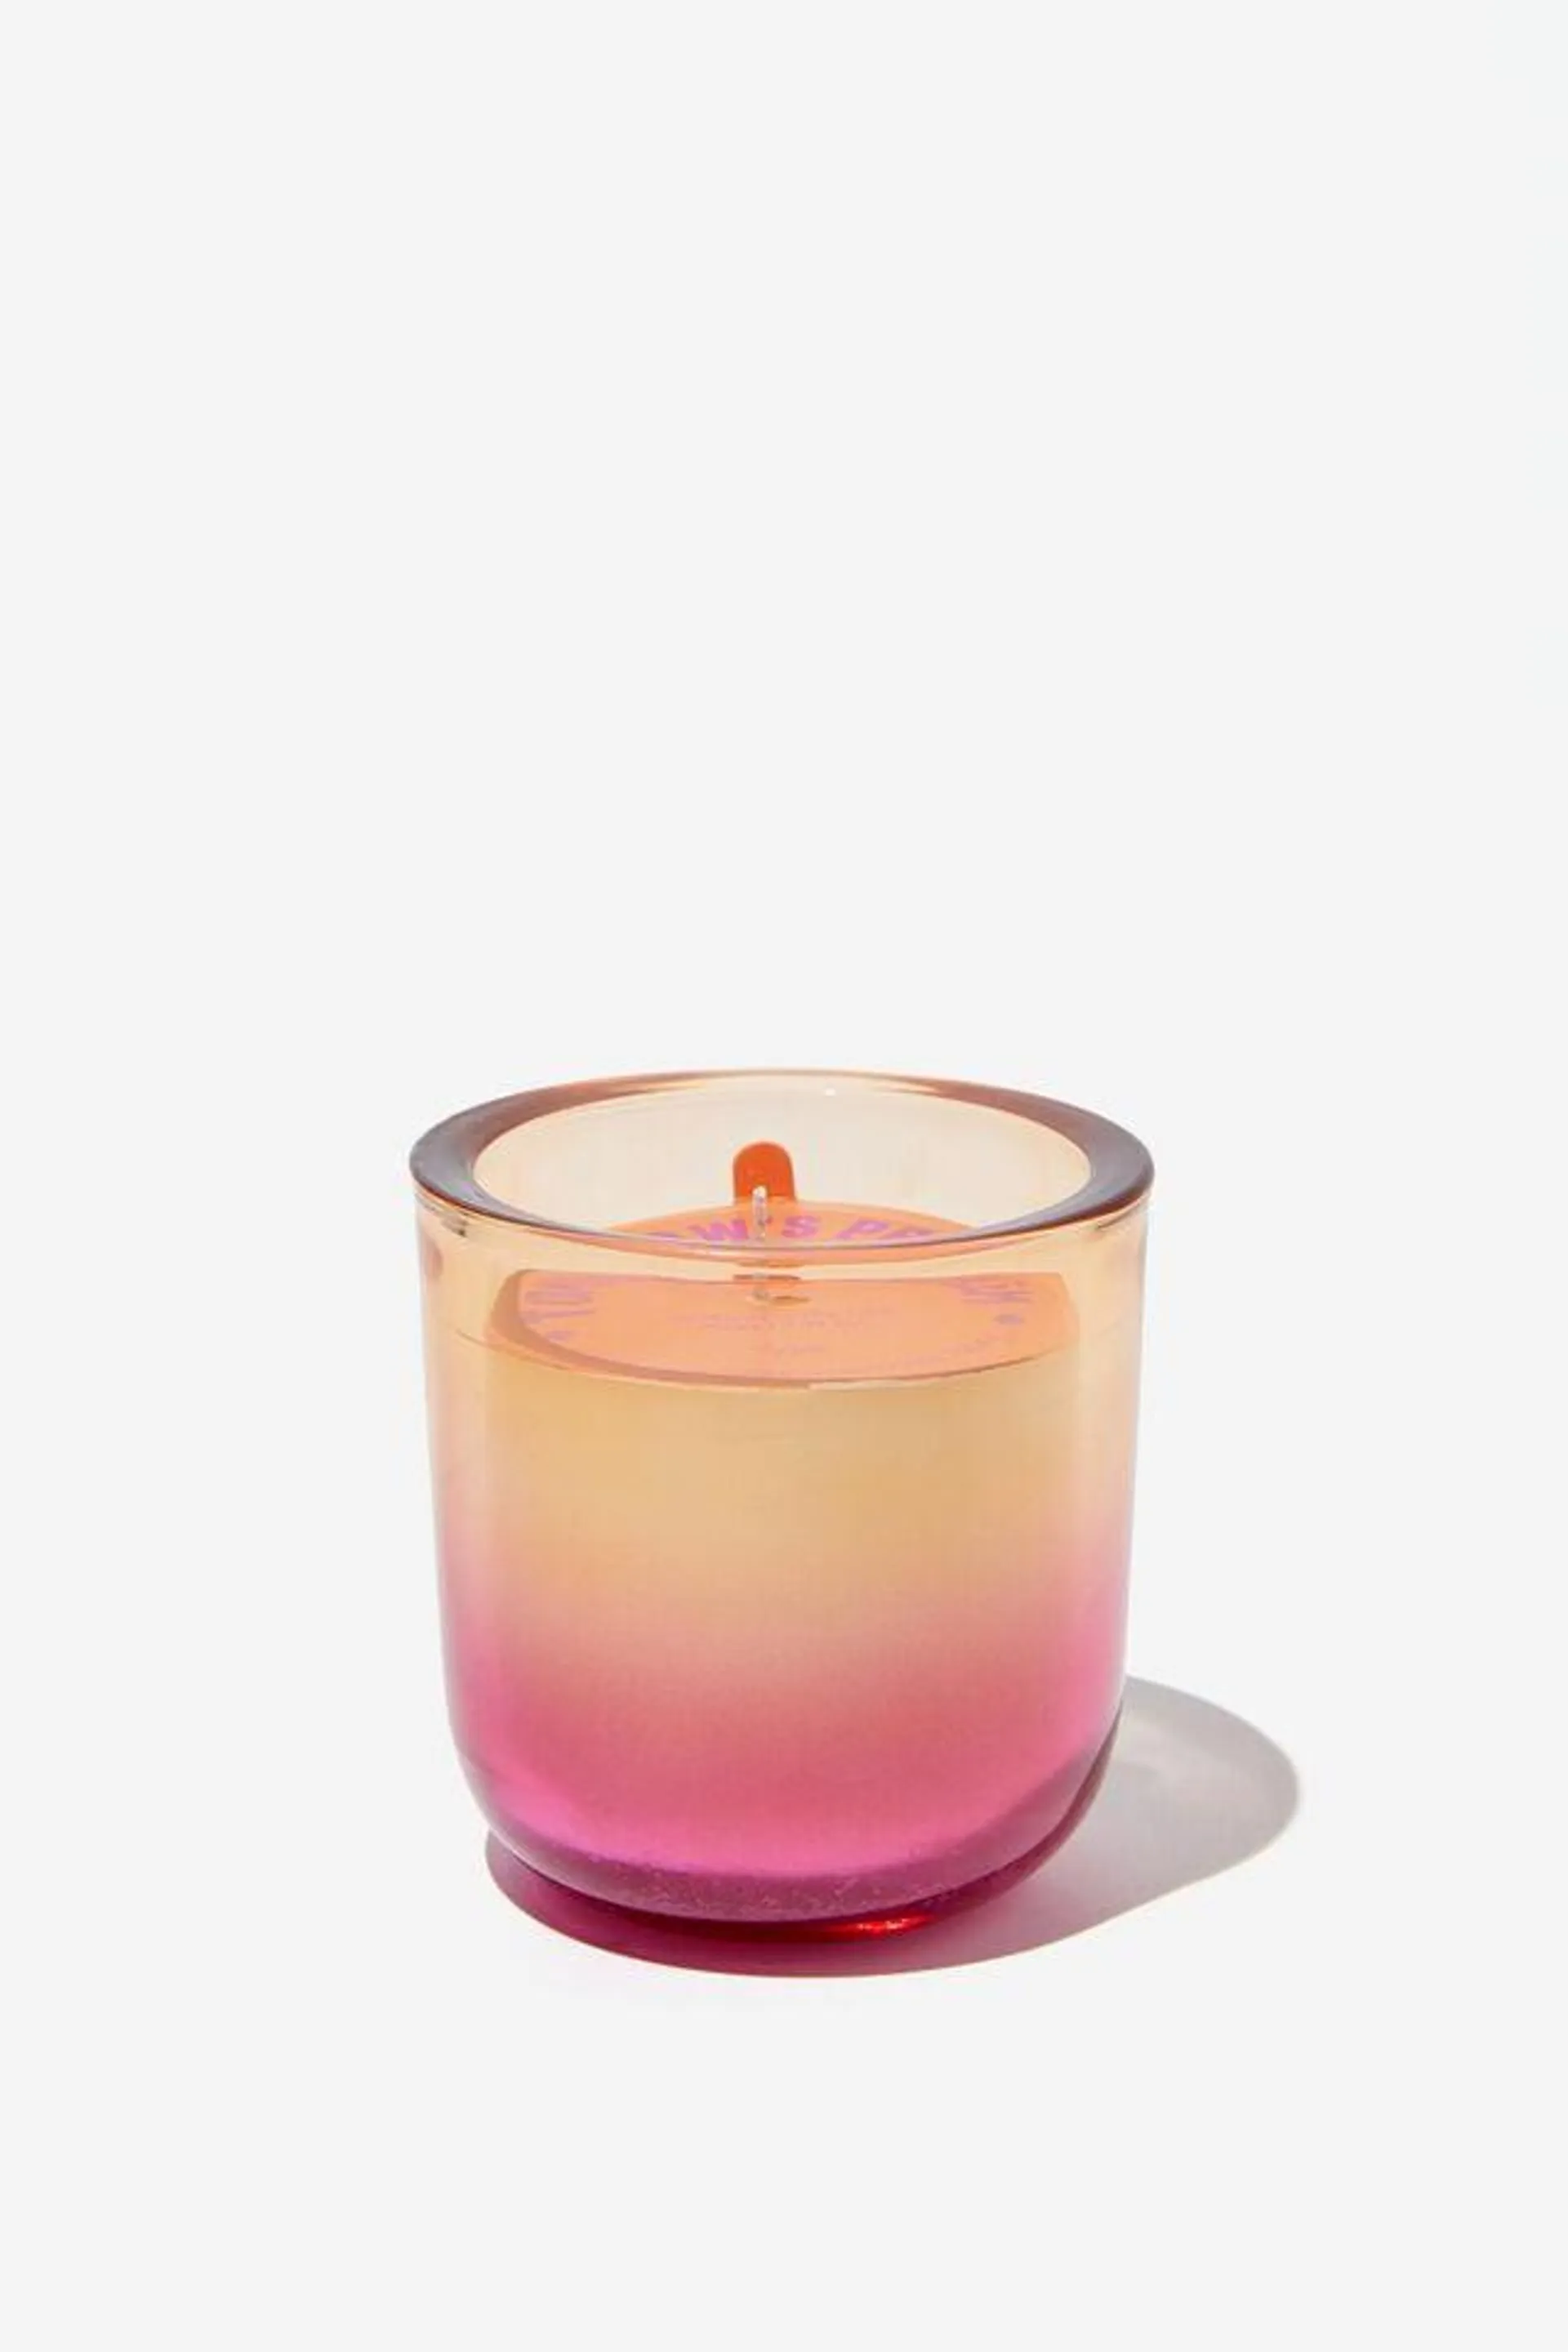 In The Mood Candle